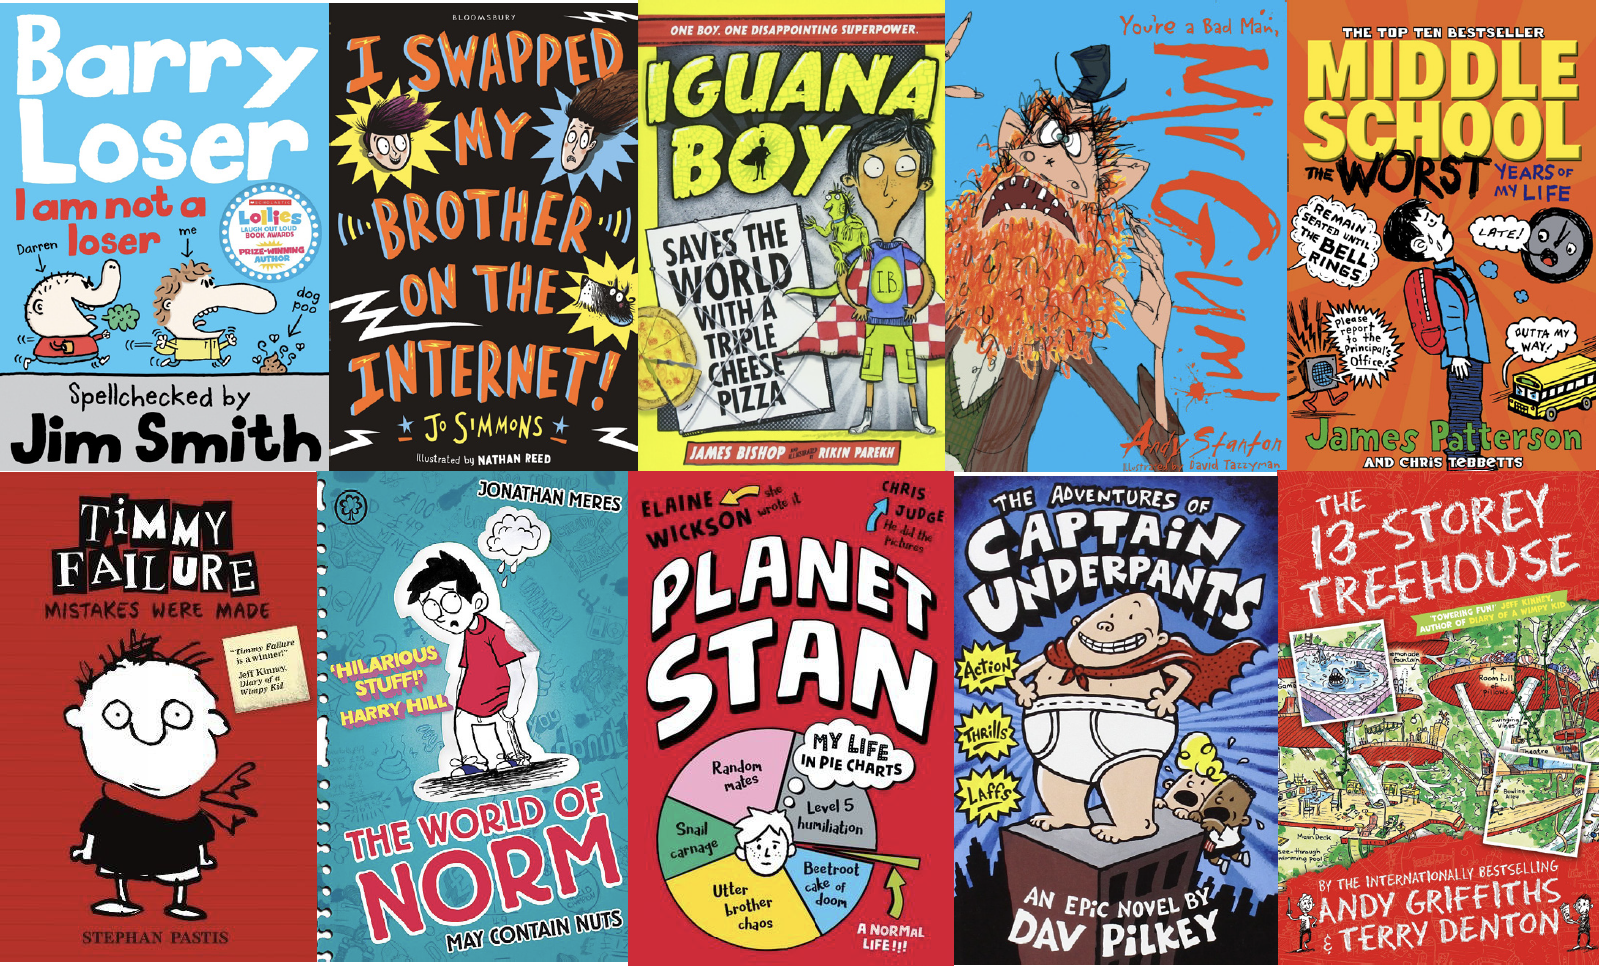 Best children's books - Branching Out: Books for Fans of Wimpy Kid